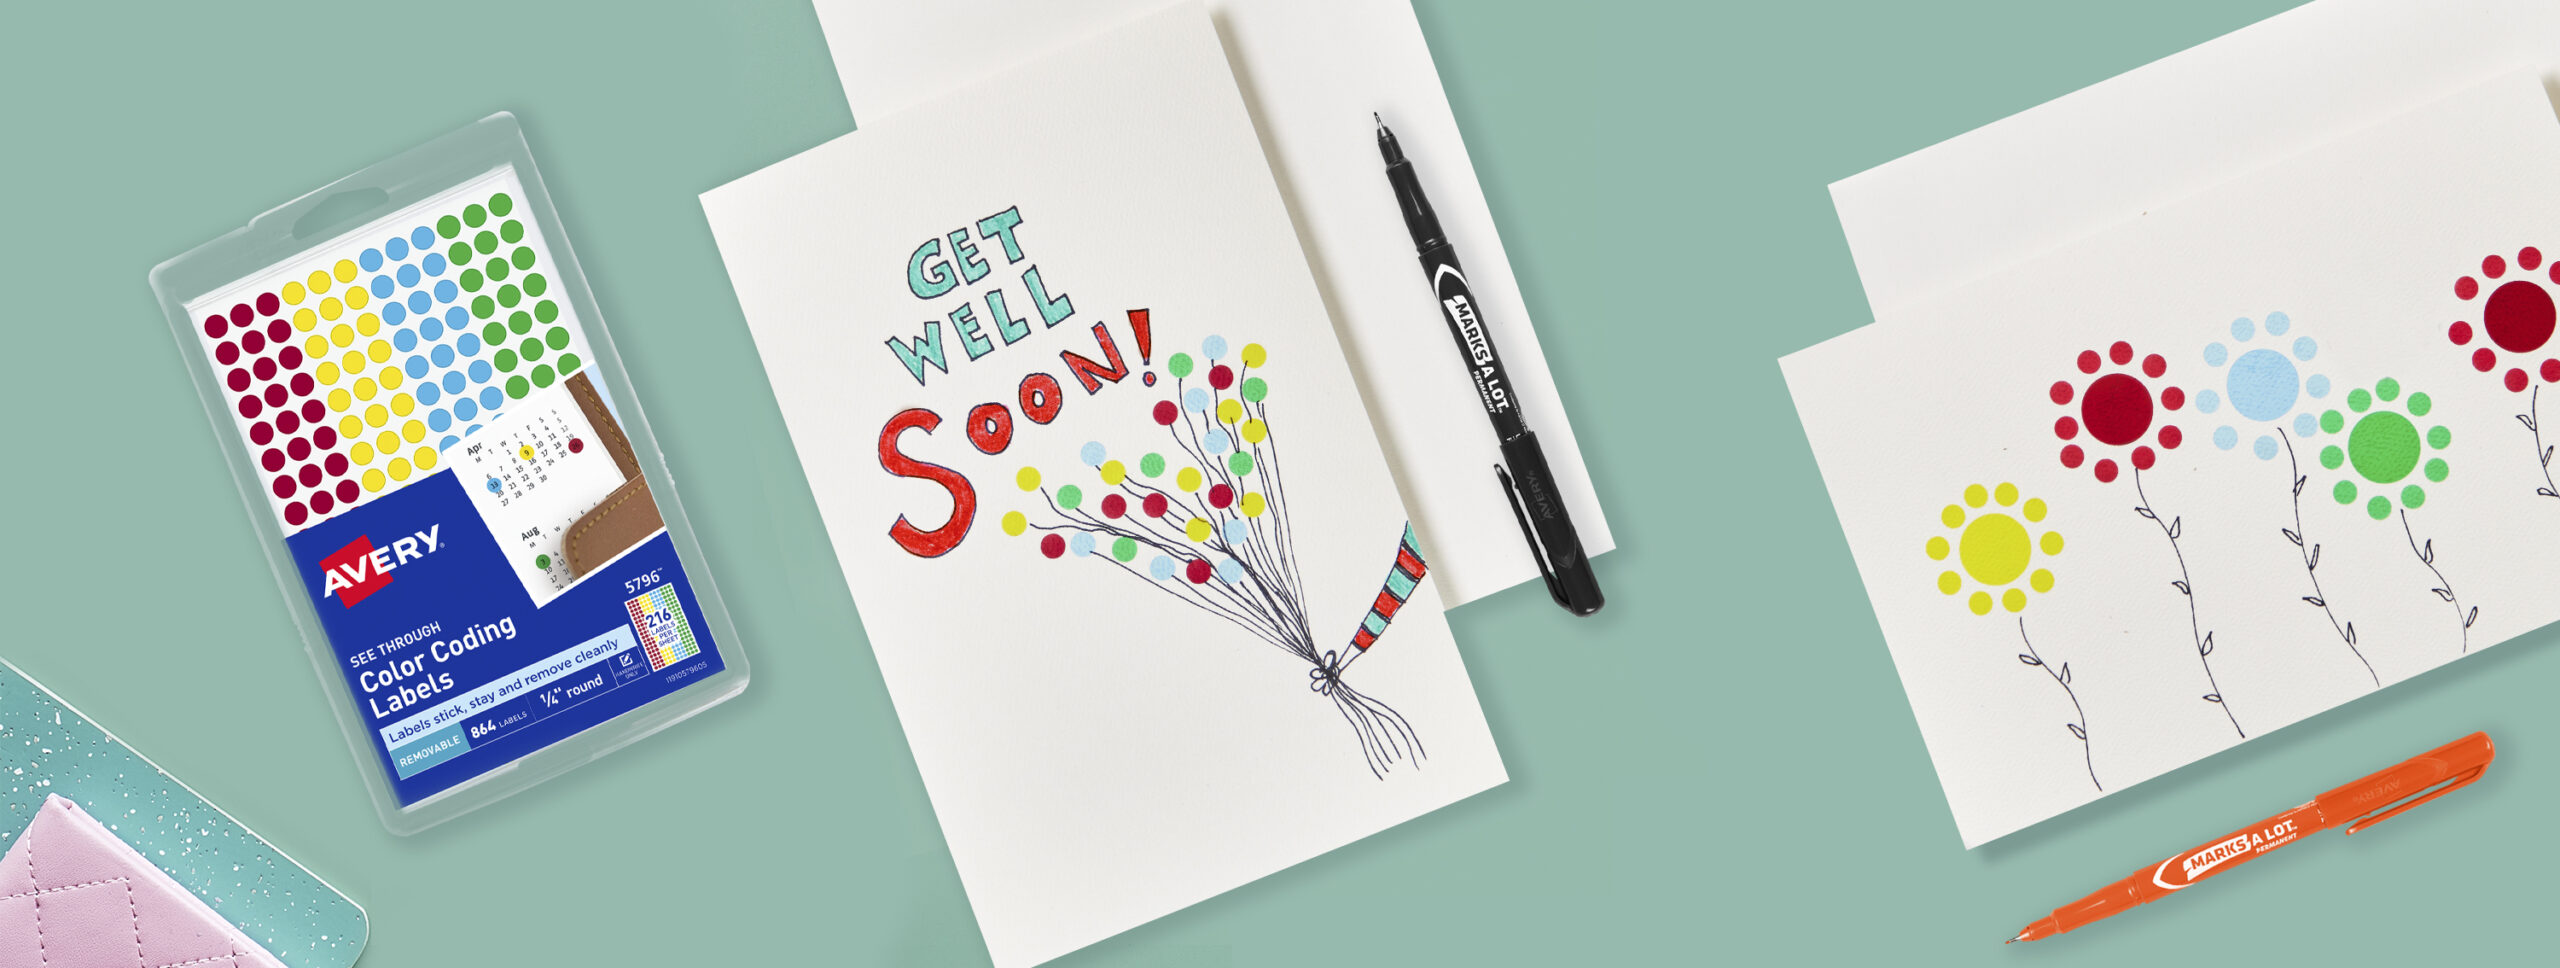 https://www.avery.com/blog/wp-content/uploads/2021/01/543406-New-Article-Banners-for-Blog-Thumbnail_new-ideas-for-making-greeting-cards-with-your-kids_Blog-Tile_3000x1134-scaled.jpg